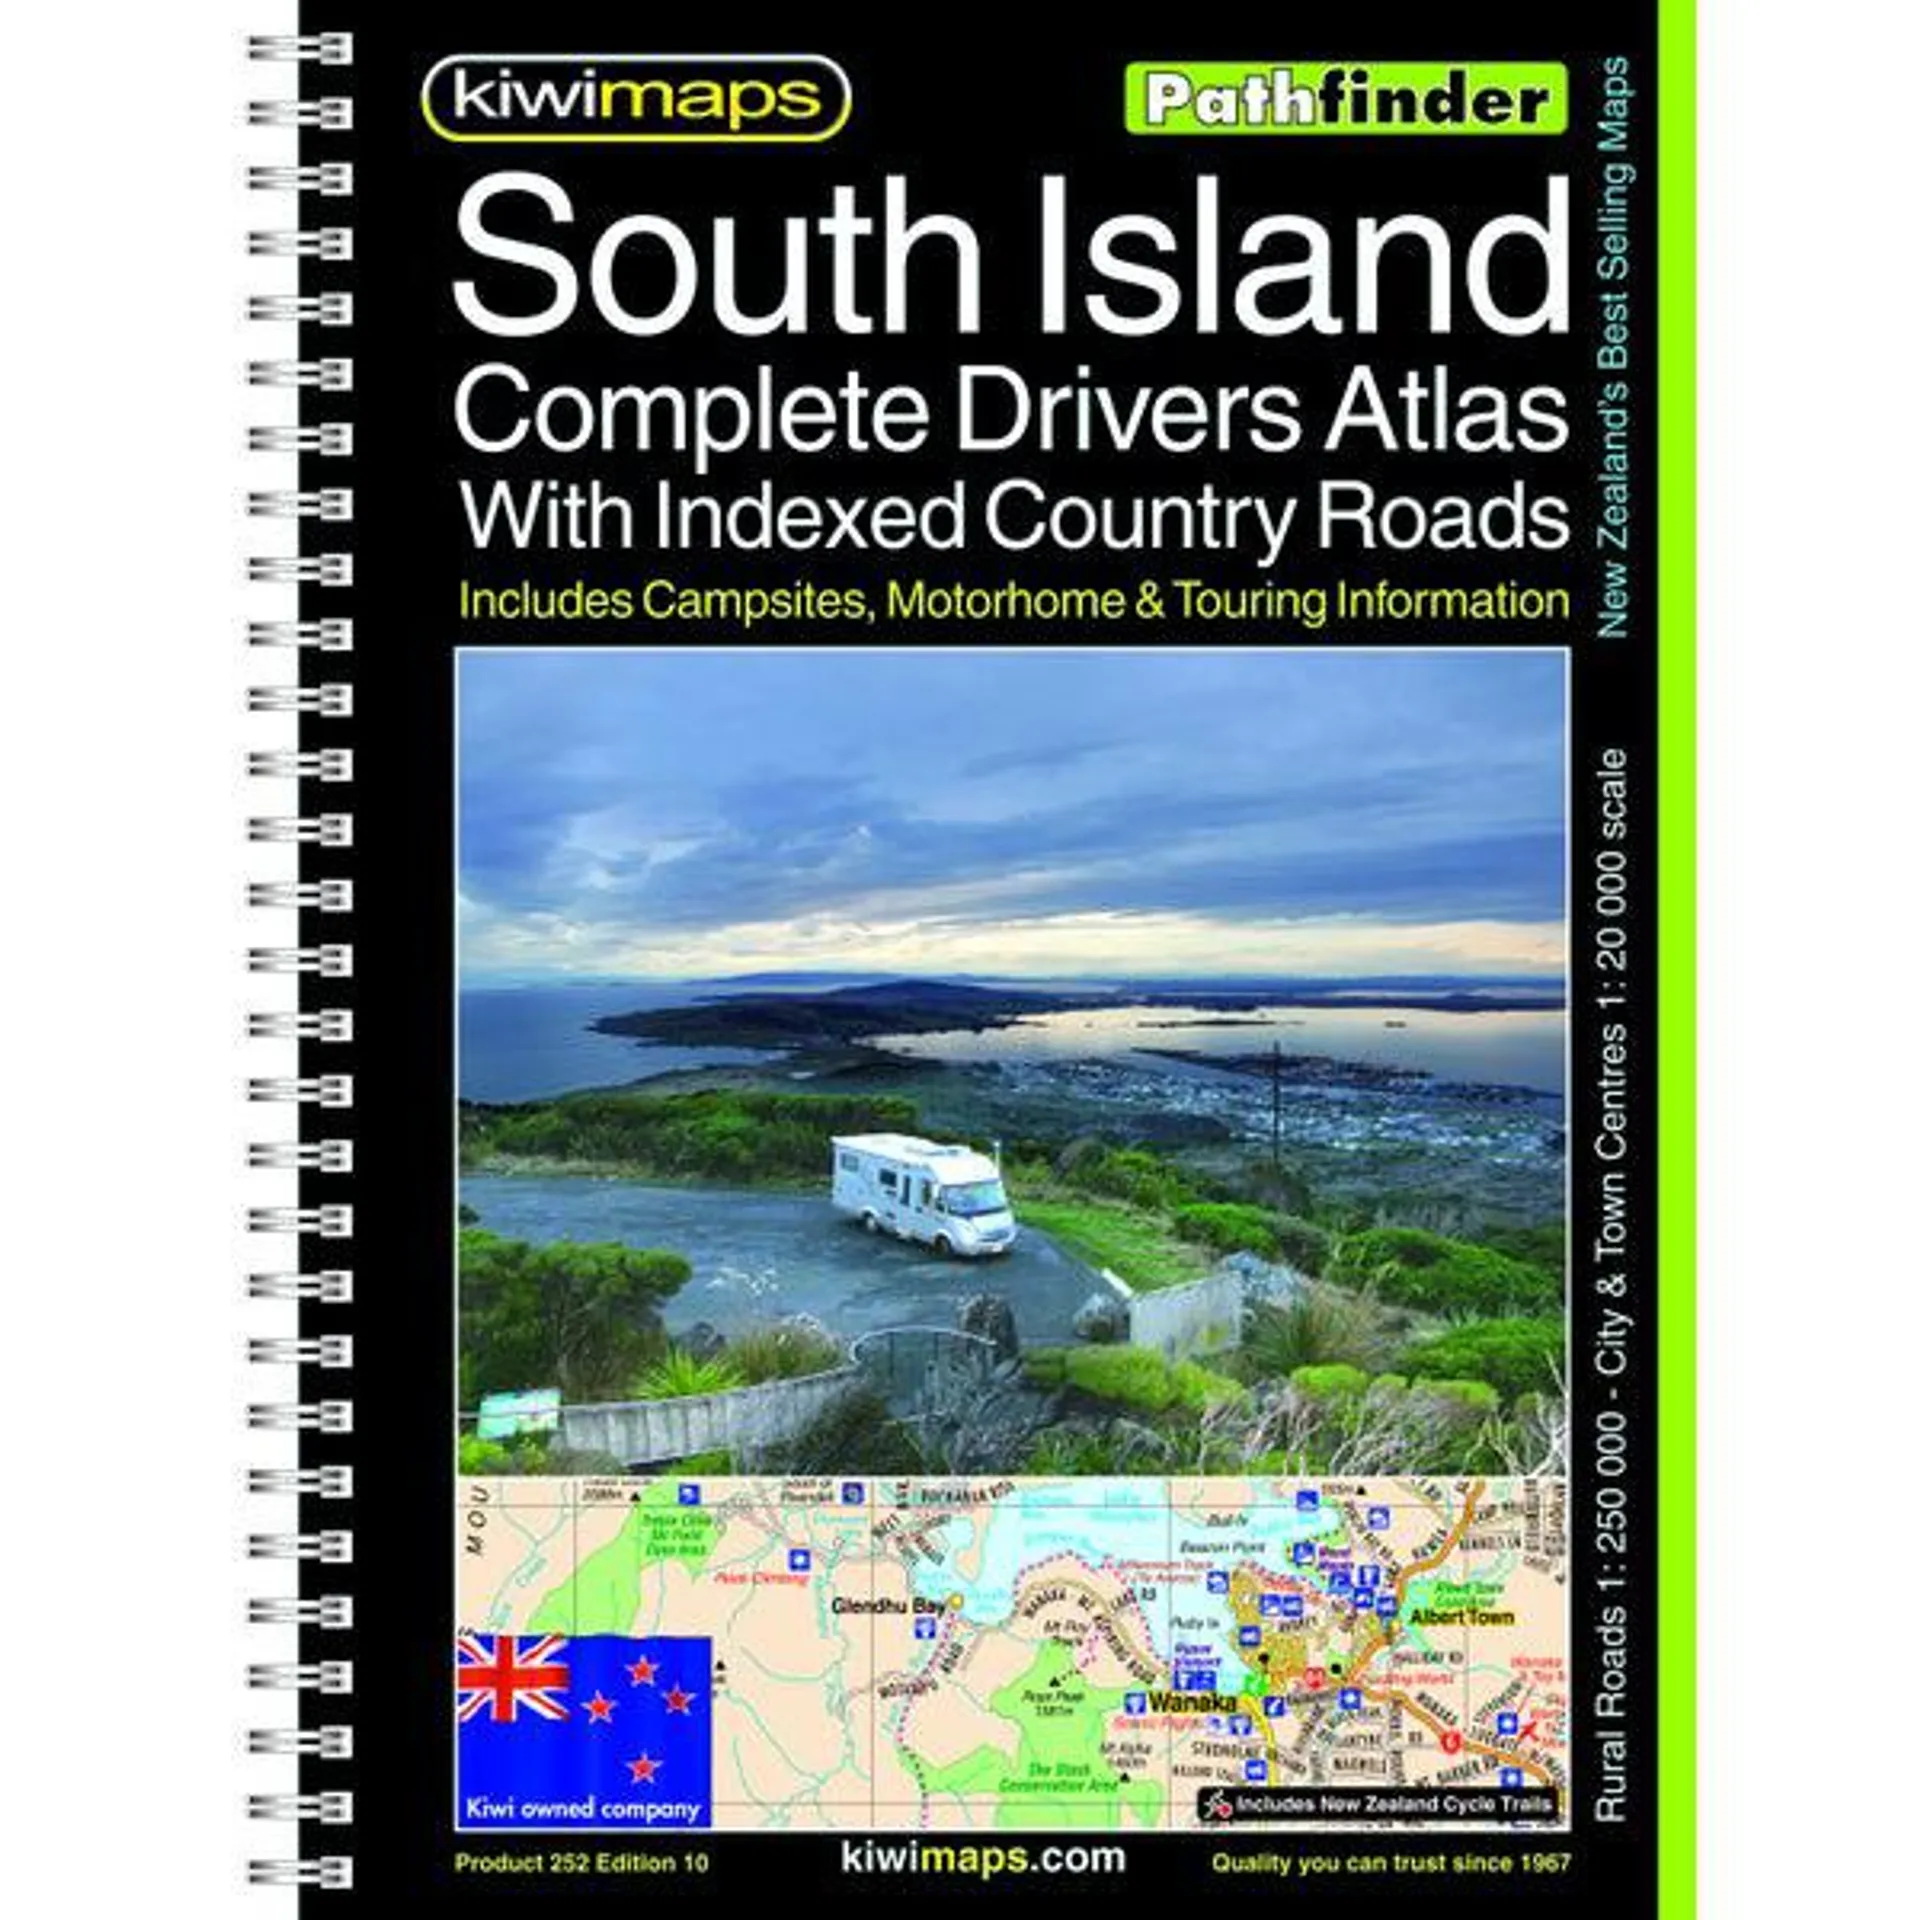 Pahtfinder A4 South Island Drivers Atlas Spiral